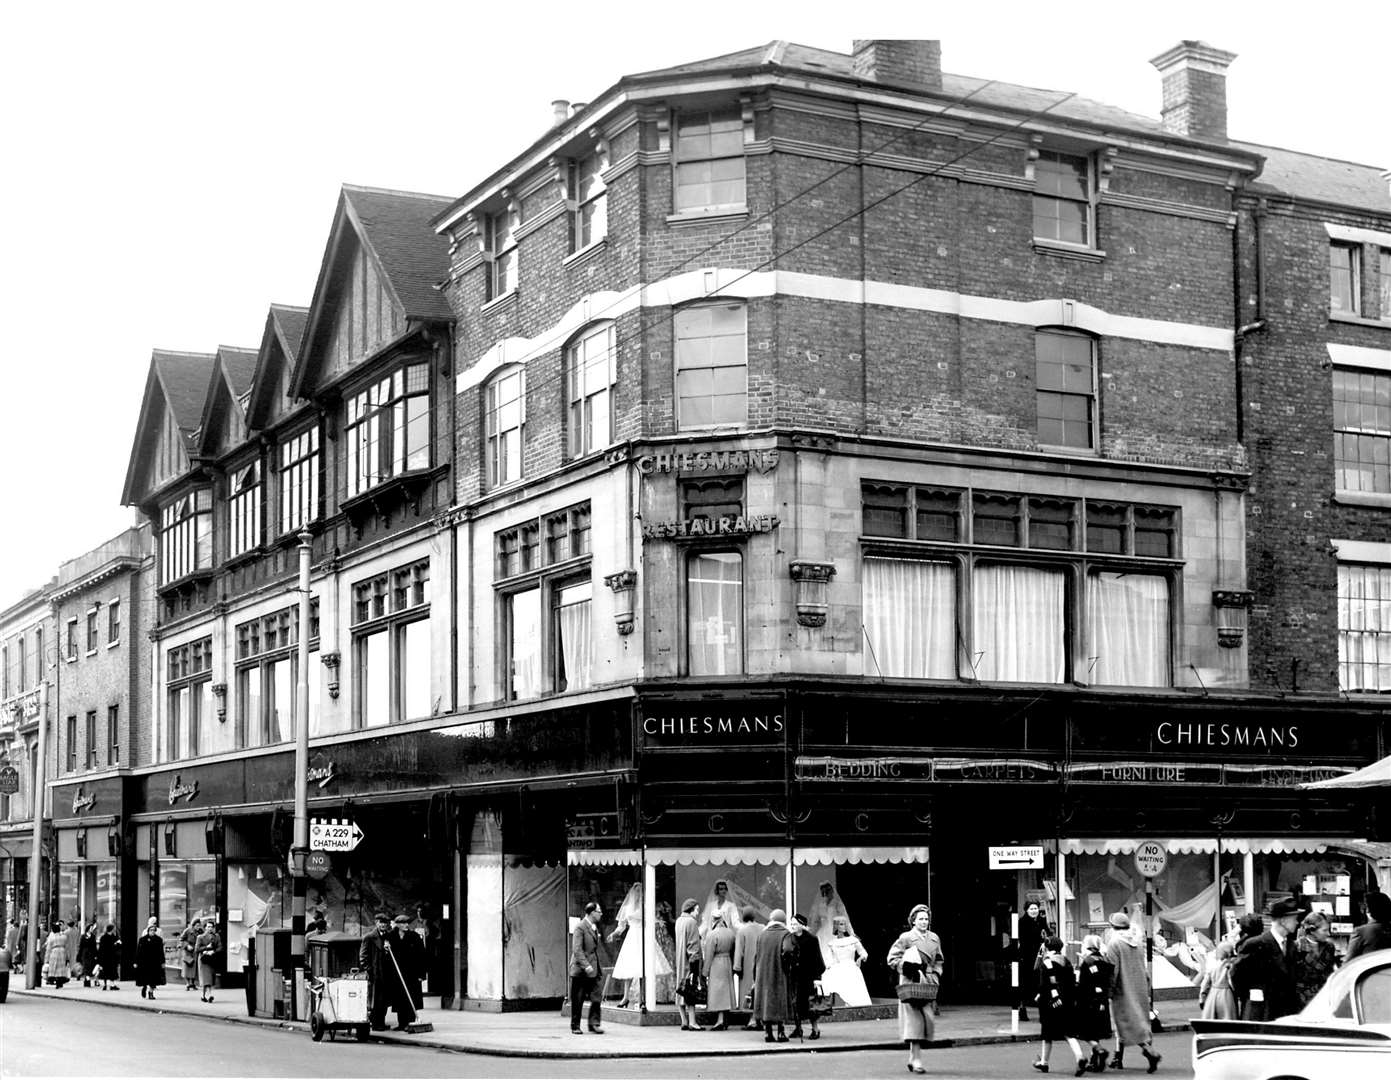 The Chiesmans store in Maidstone, March 1961